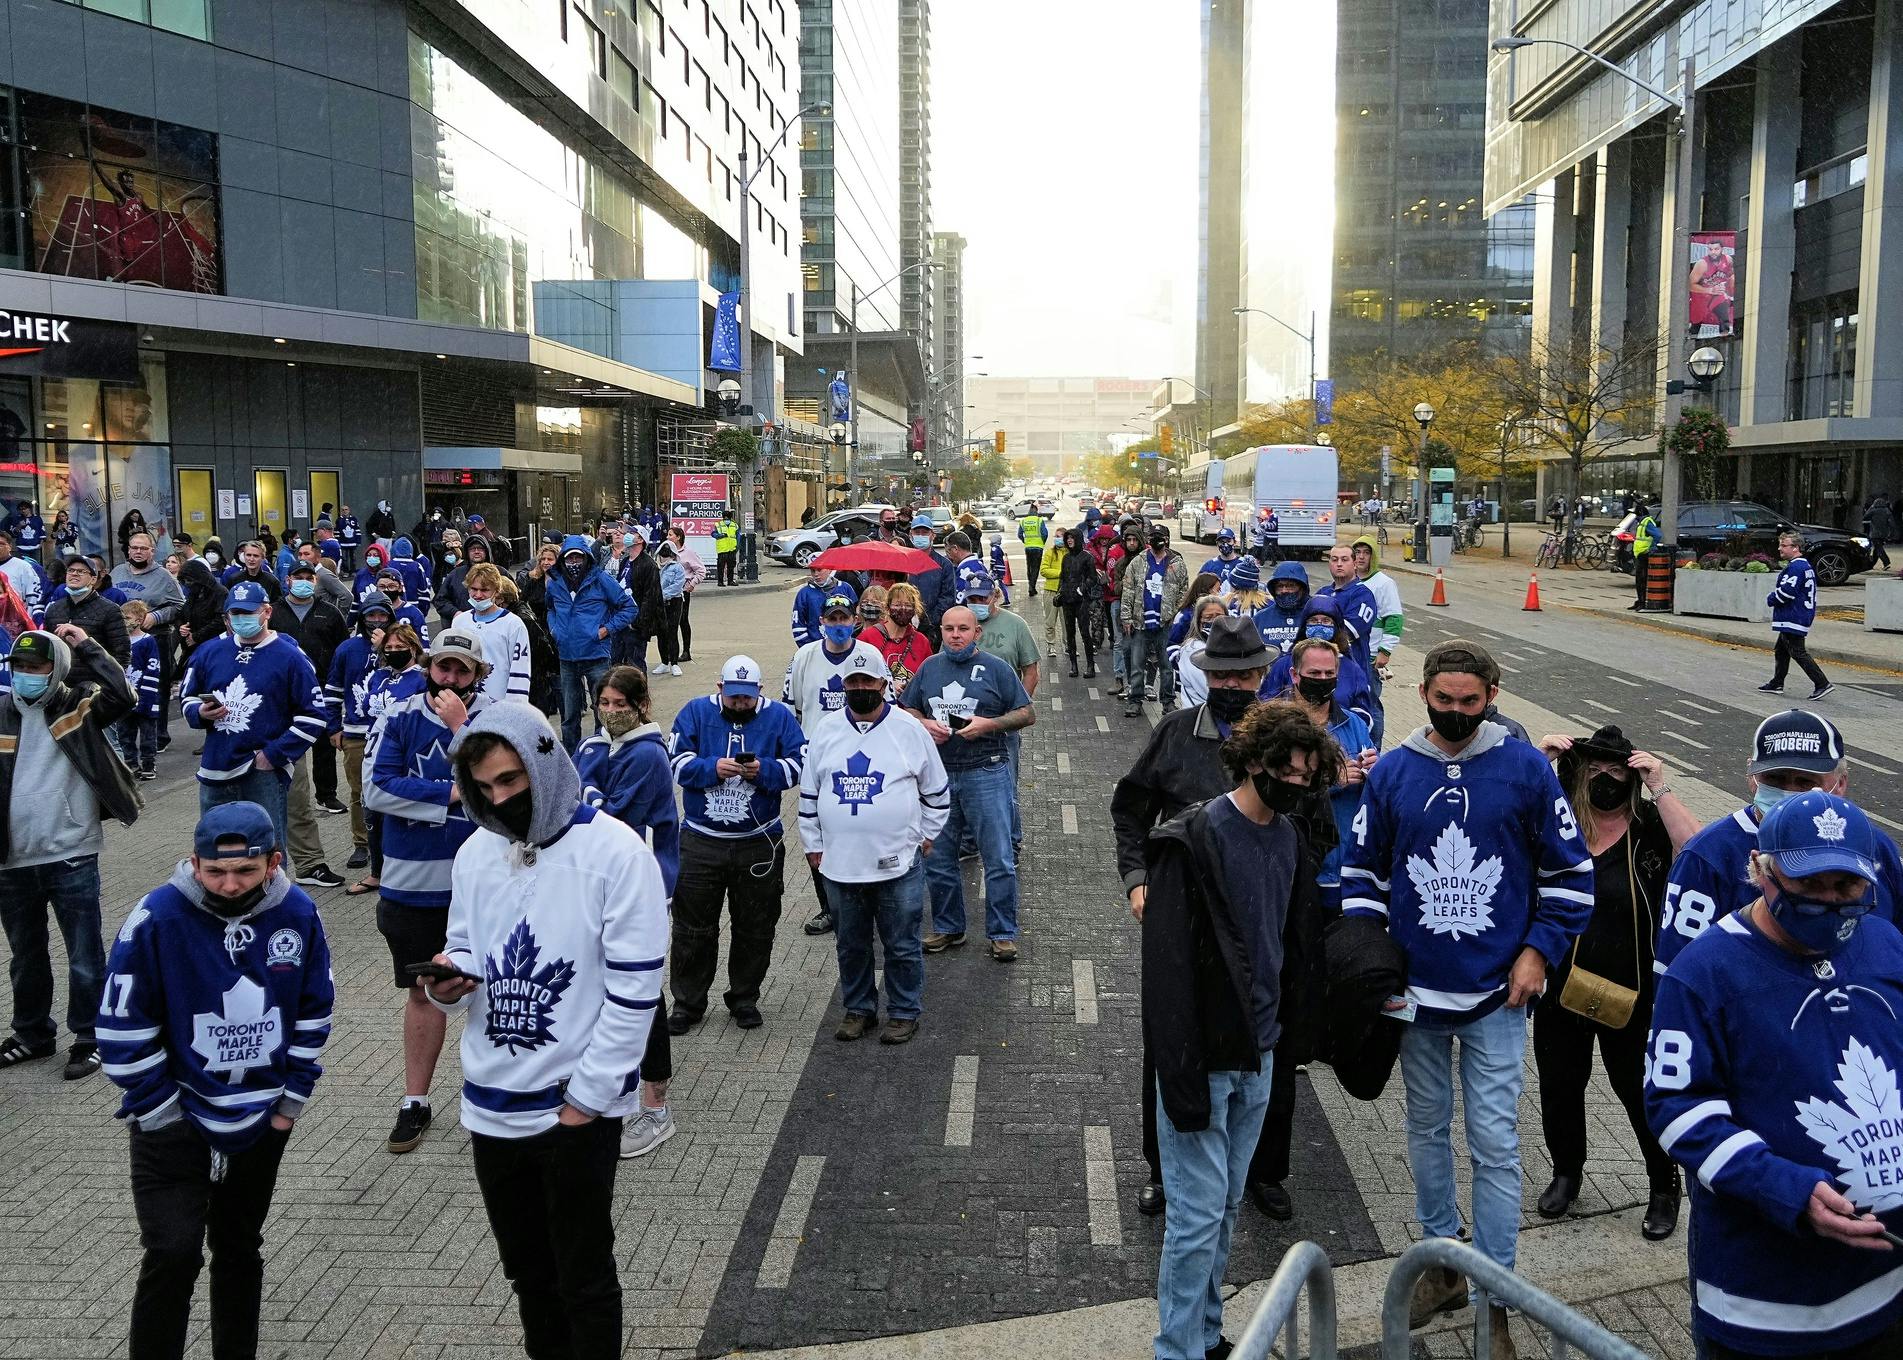 Toronto's all-time draft team: Plan the parade with this Leafs